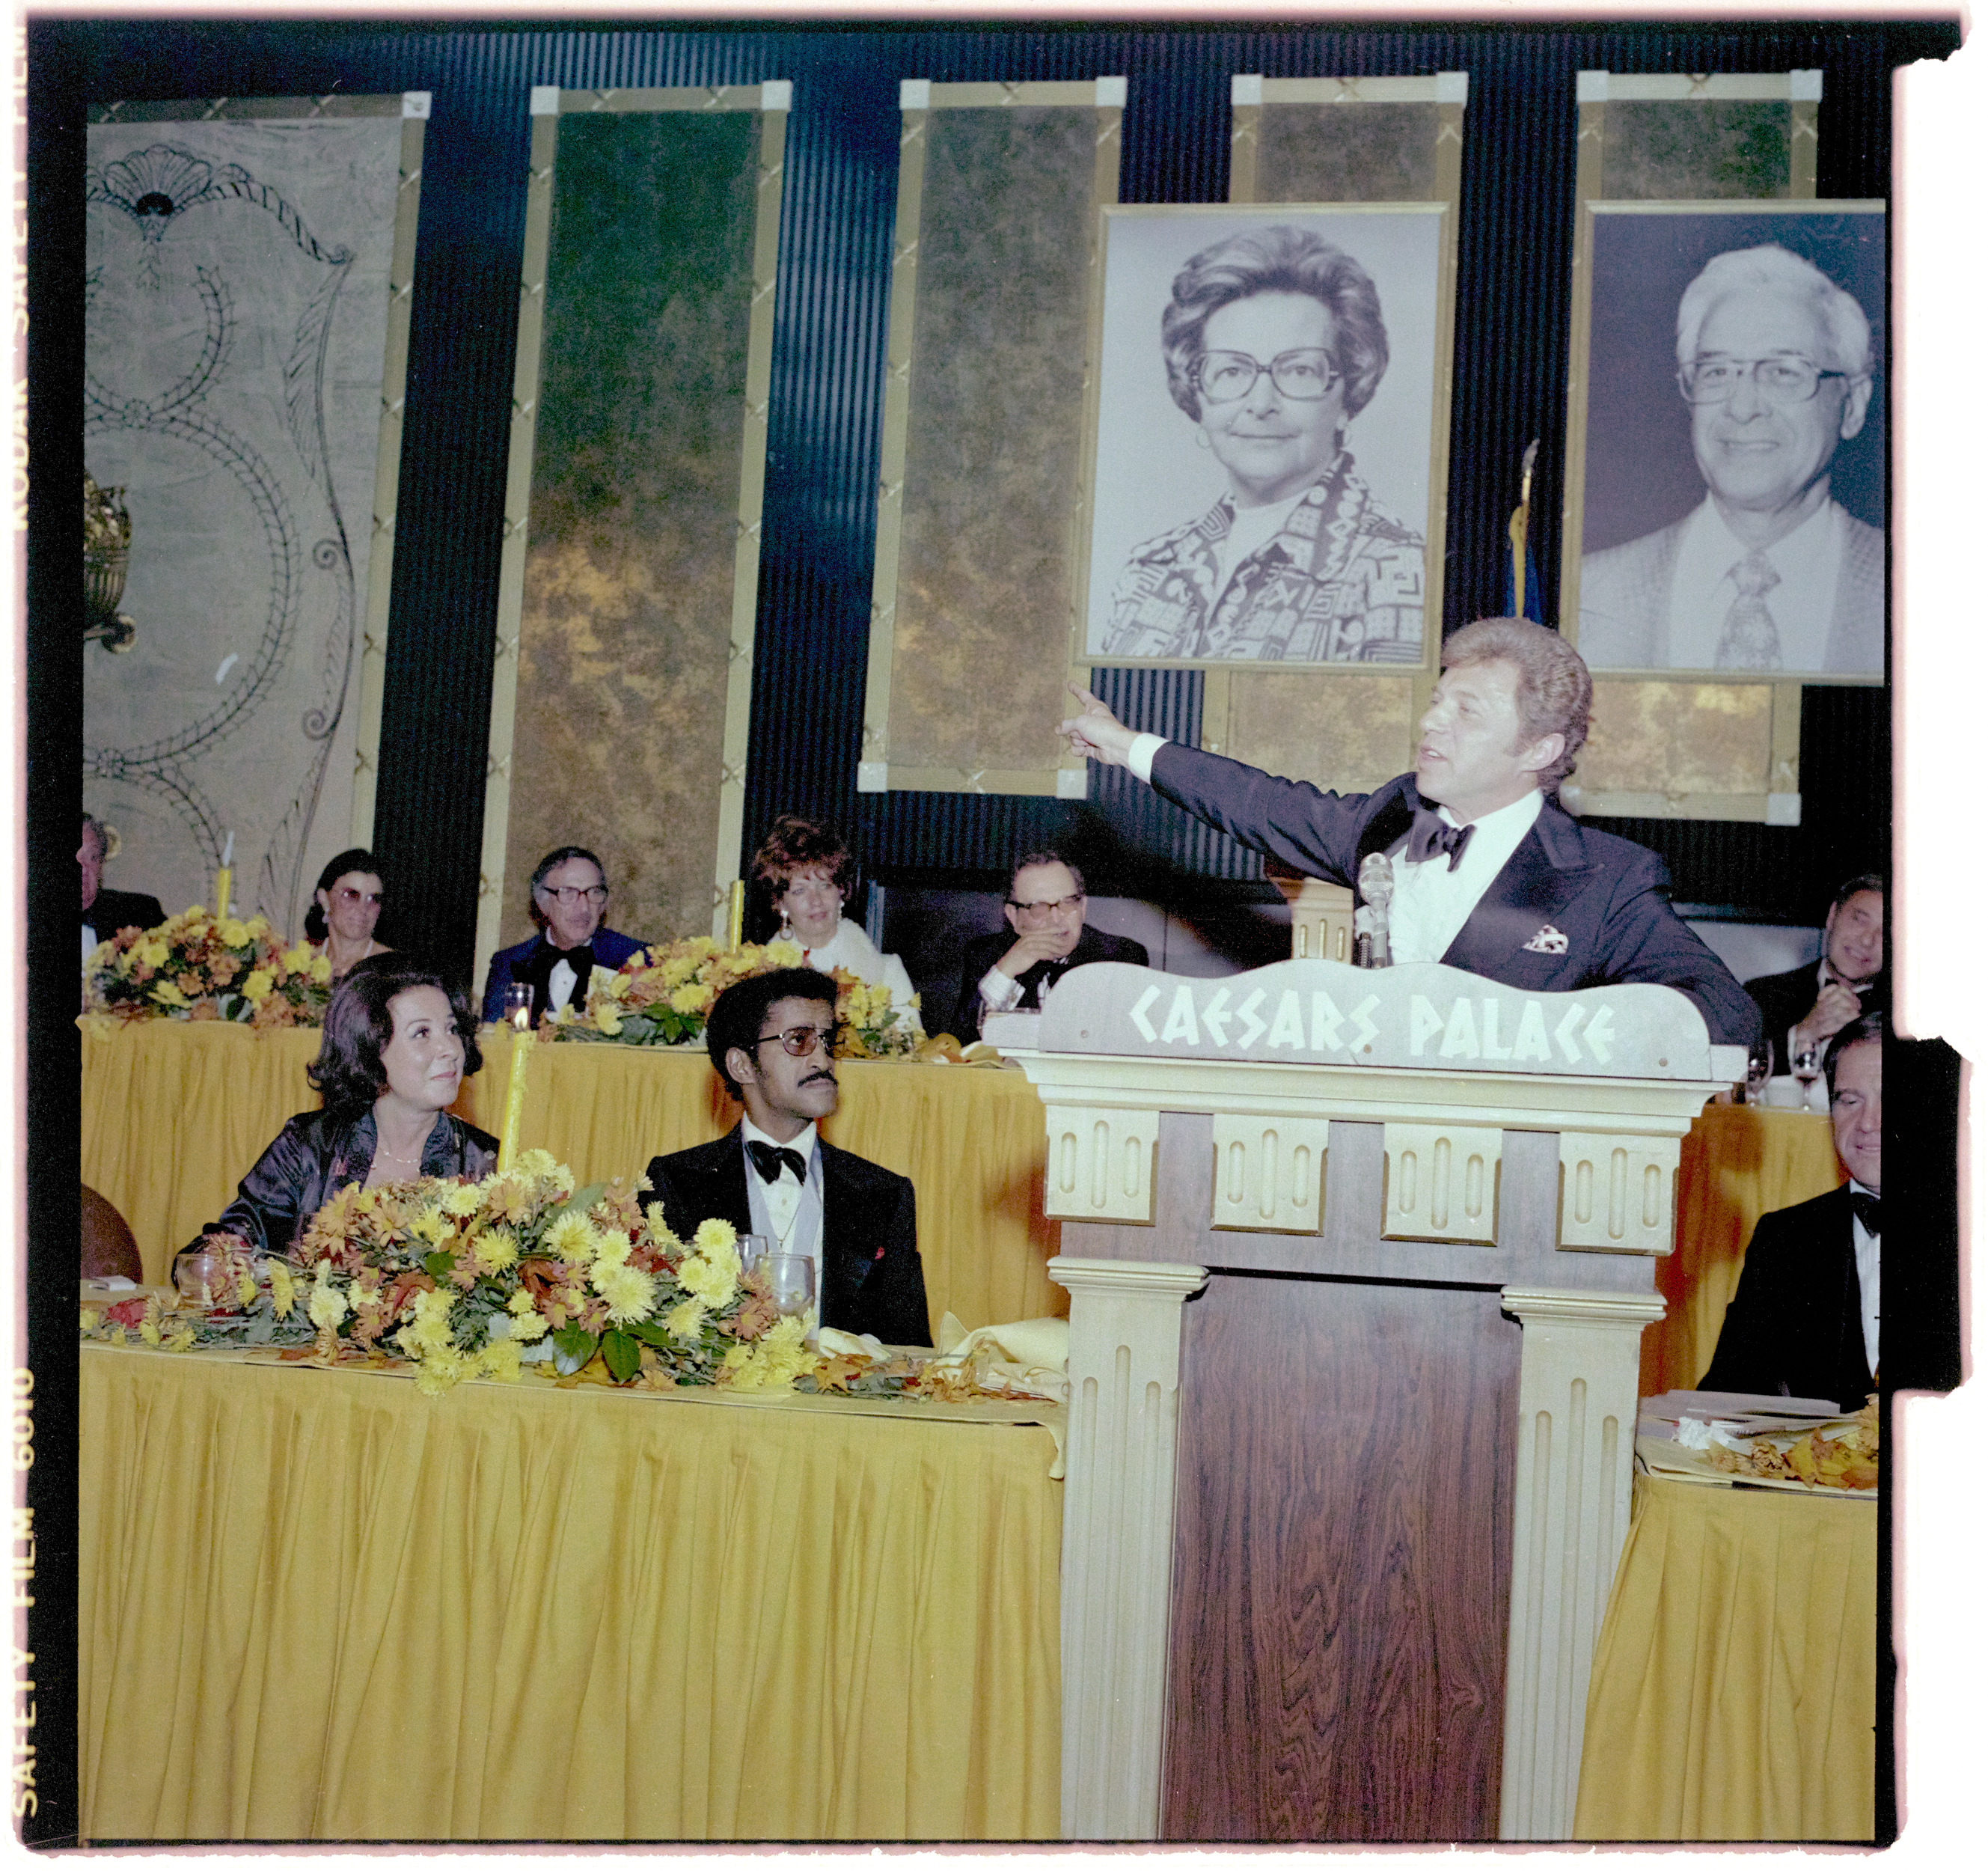 Photographs of Combined Jewish Appeal (Israel Bonds Dinner), image 03